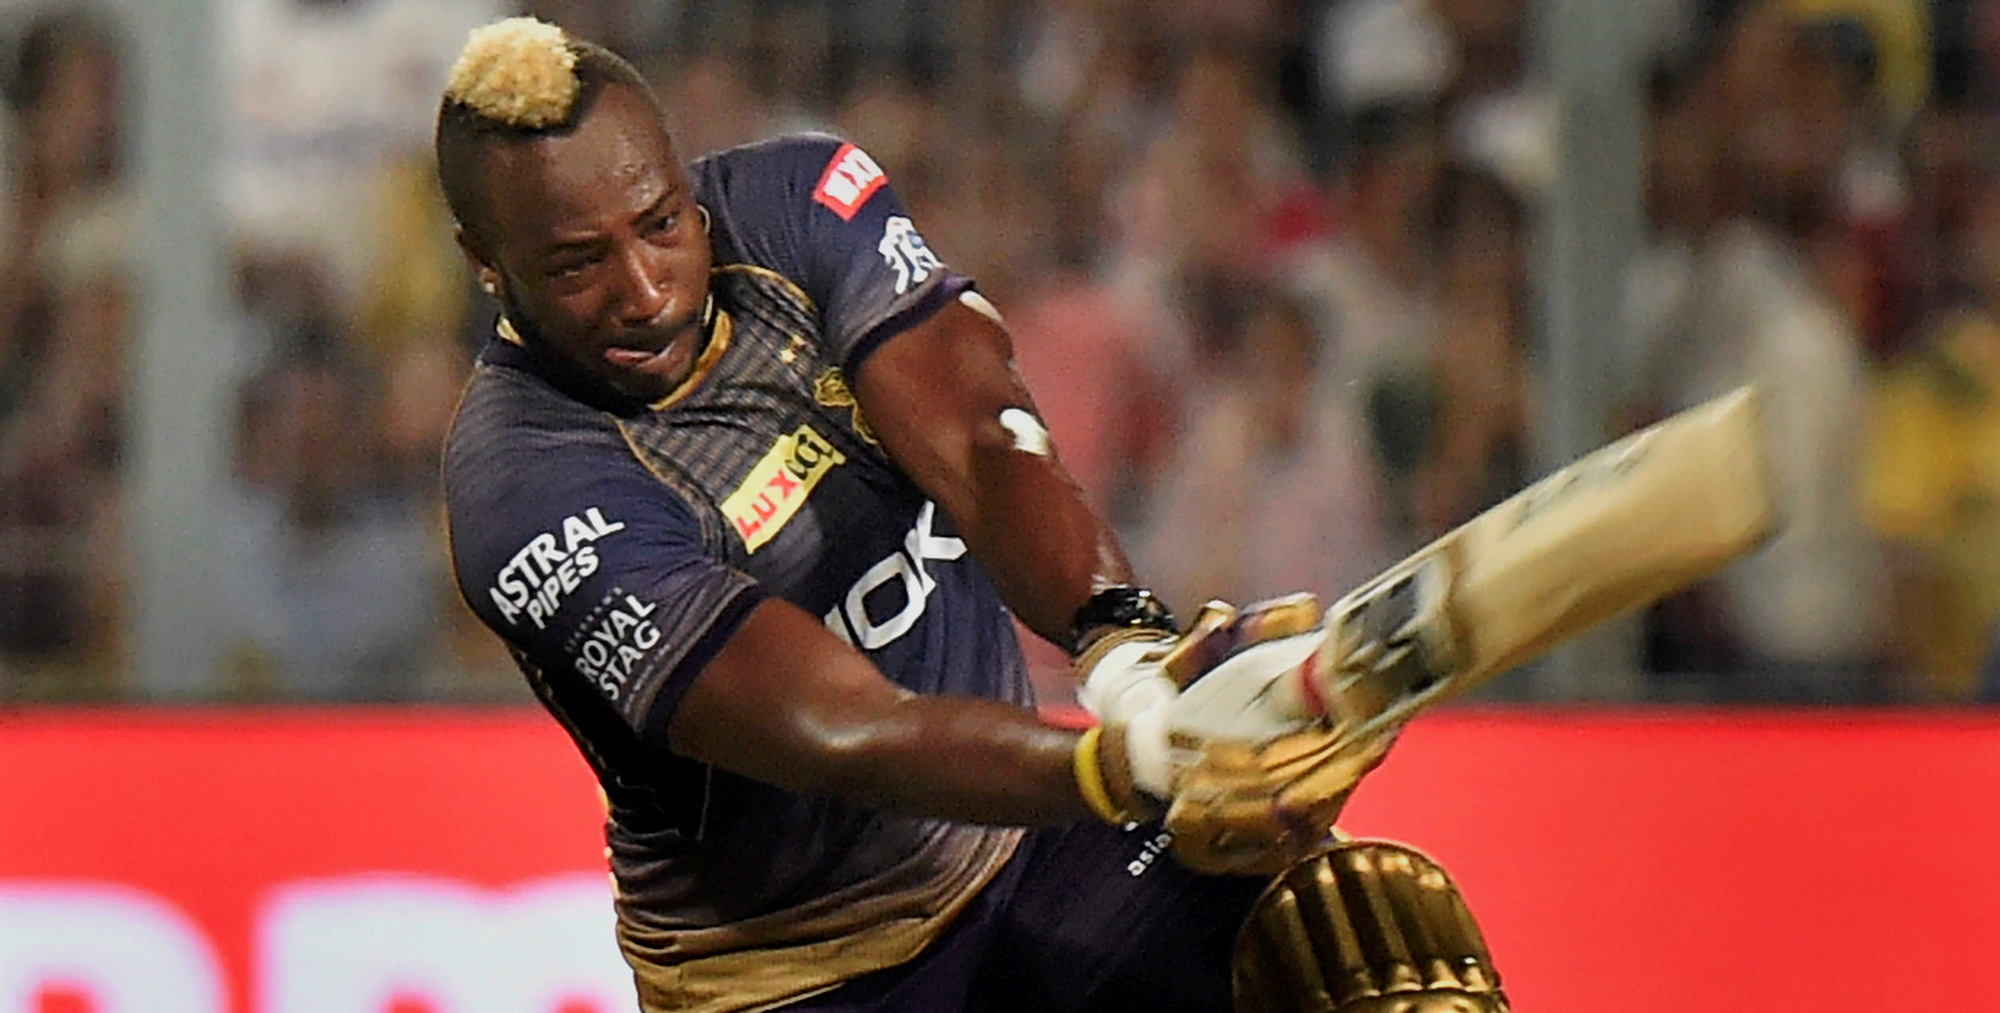 Kolkata Knight Riders Andre Russell plays a shot against Sunrisers Hyderabad during IPL-2019 cricket match, at Eden Garden in Kolkata on Sunday, March 24, 2019.